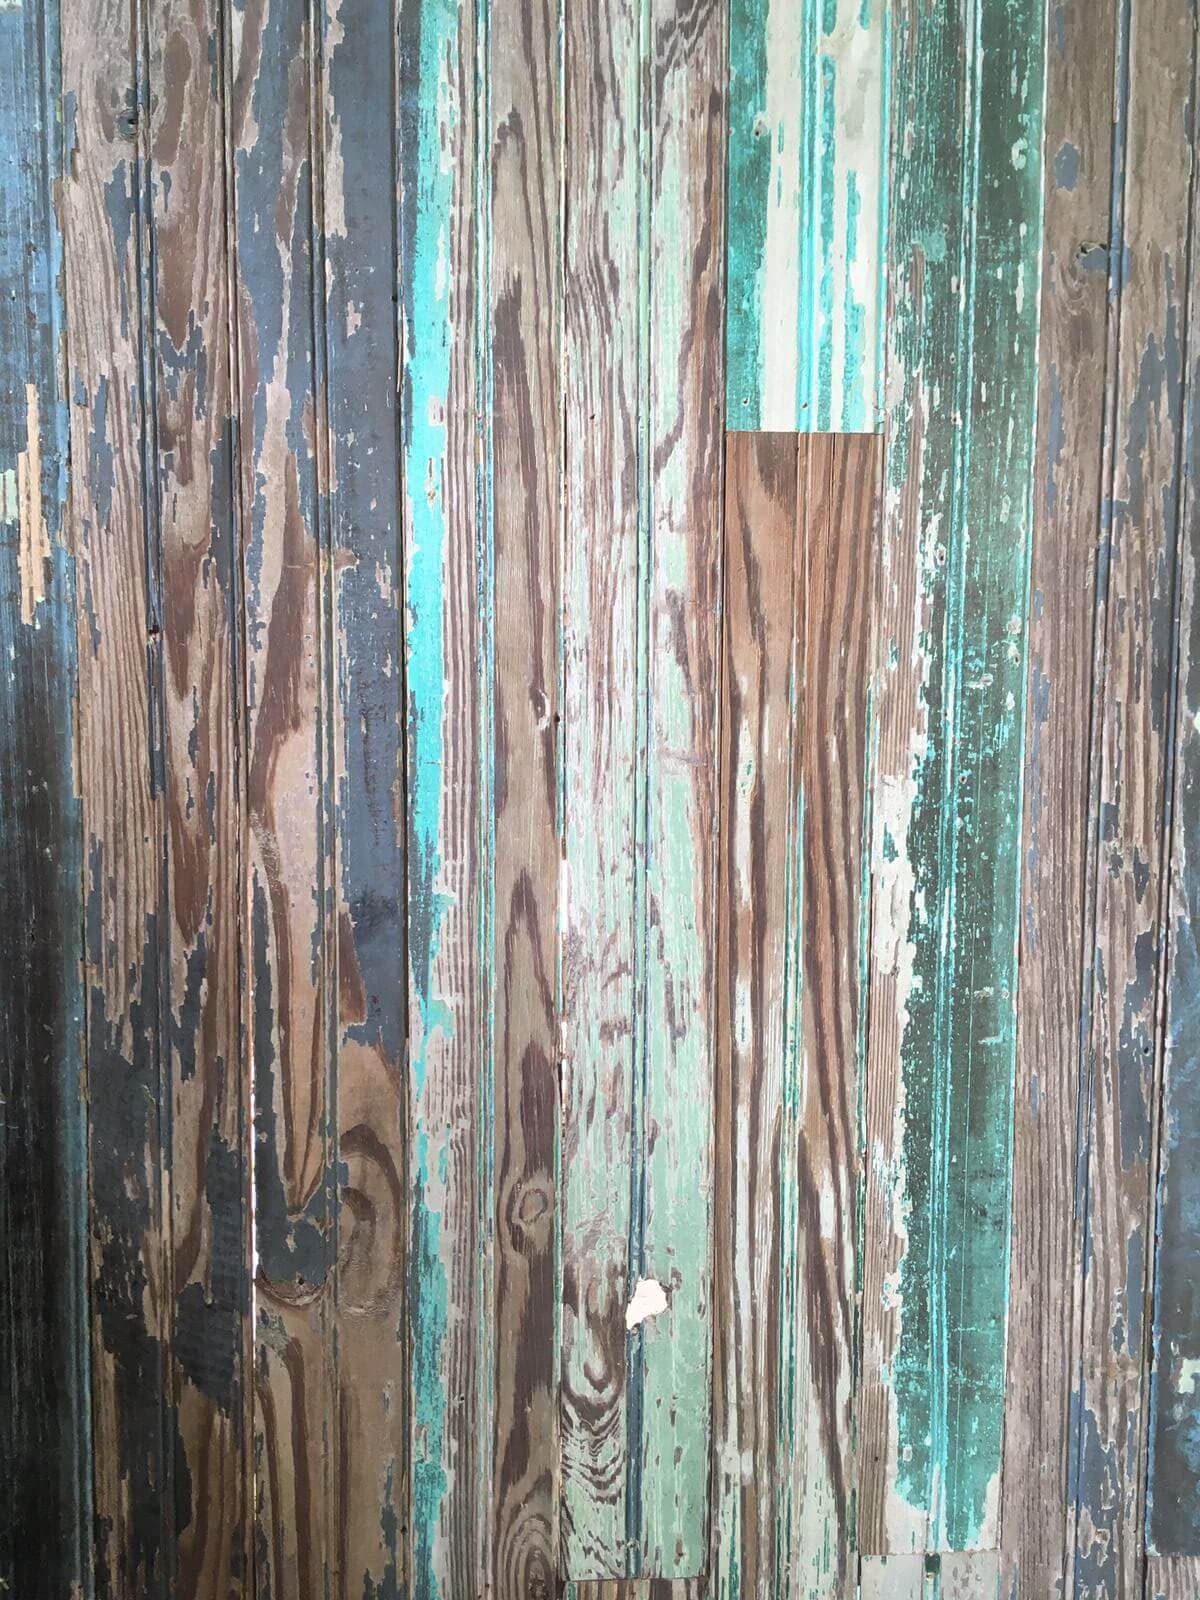 distressed narrow widths bead board planks with chipping colors